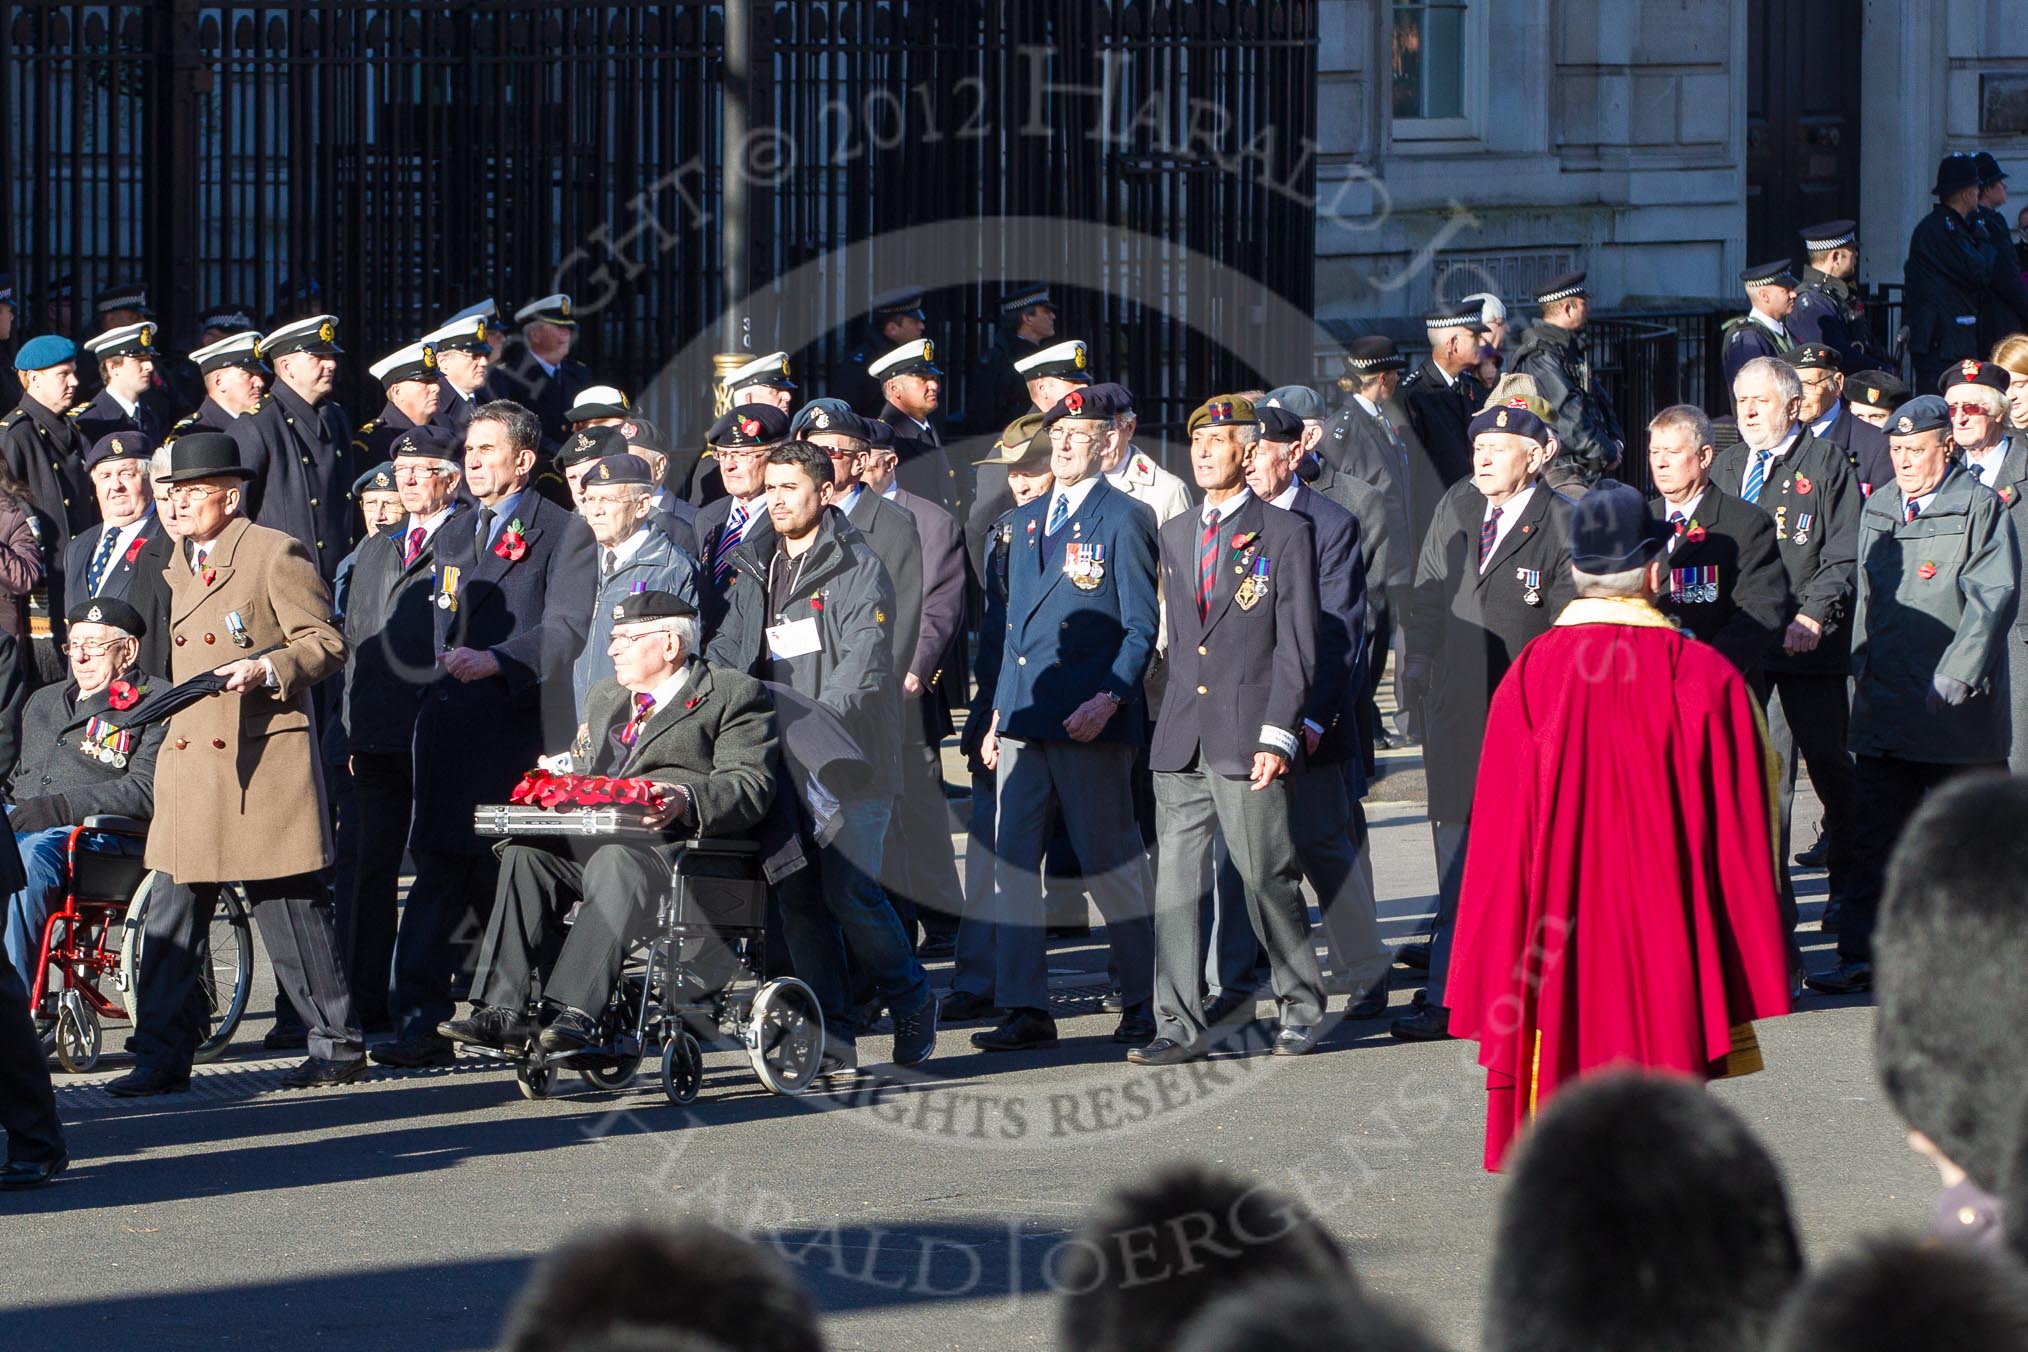 Remembrance Sunday 2012 Cenotaph March Past: Group F10 - National Service Veterans Alliance..
Whitehall, Cenotaph,
London SW1,

United Kingdom,
on 11 November 2012 at 11:46, image #445